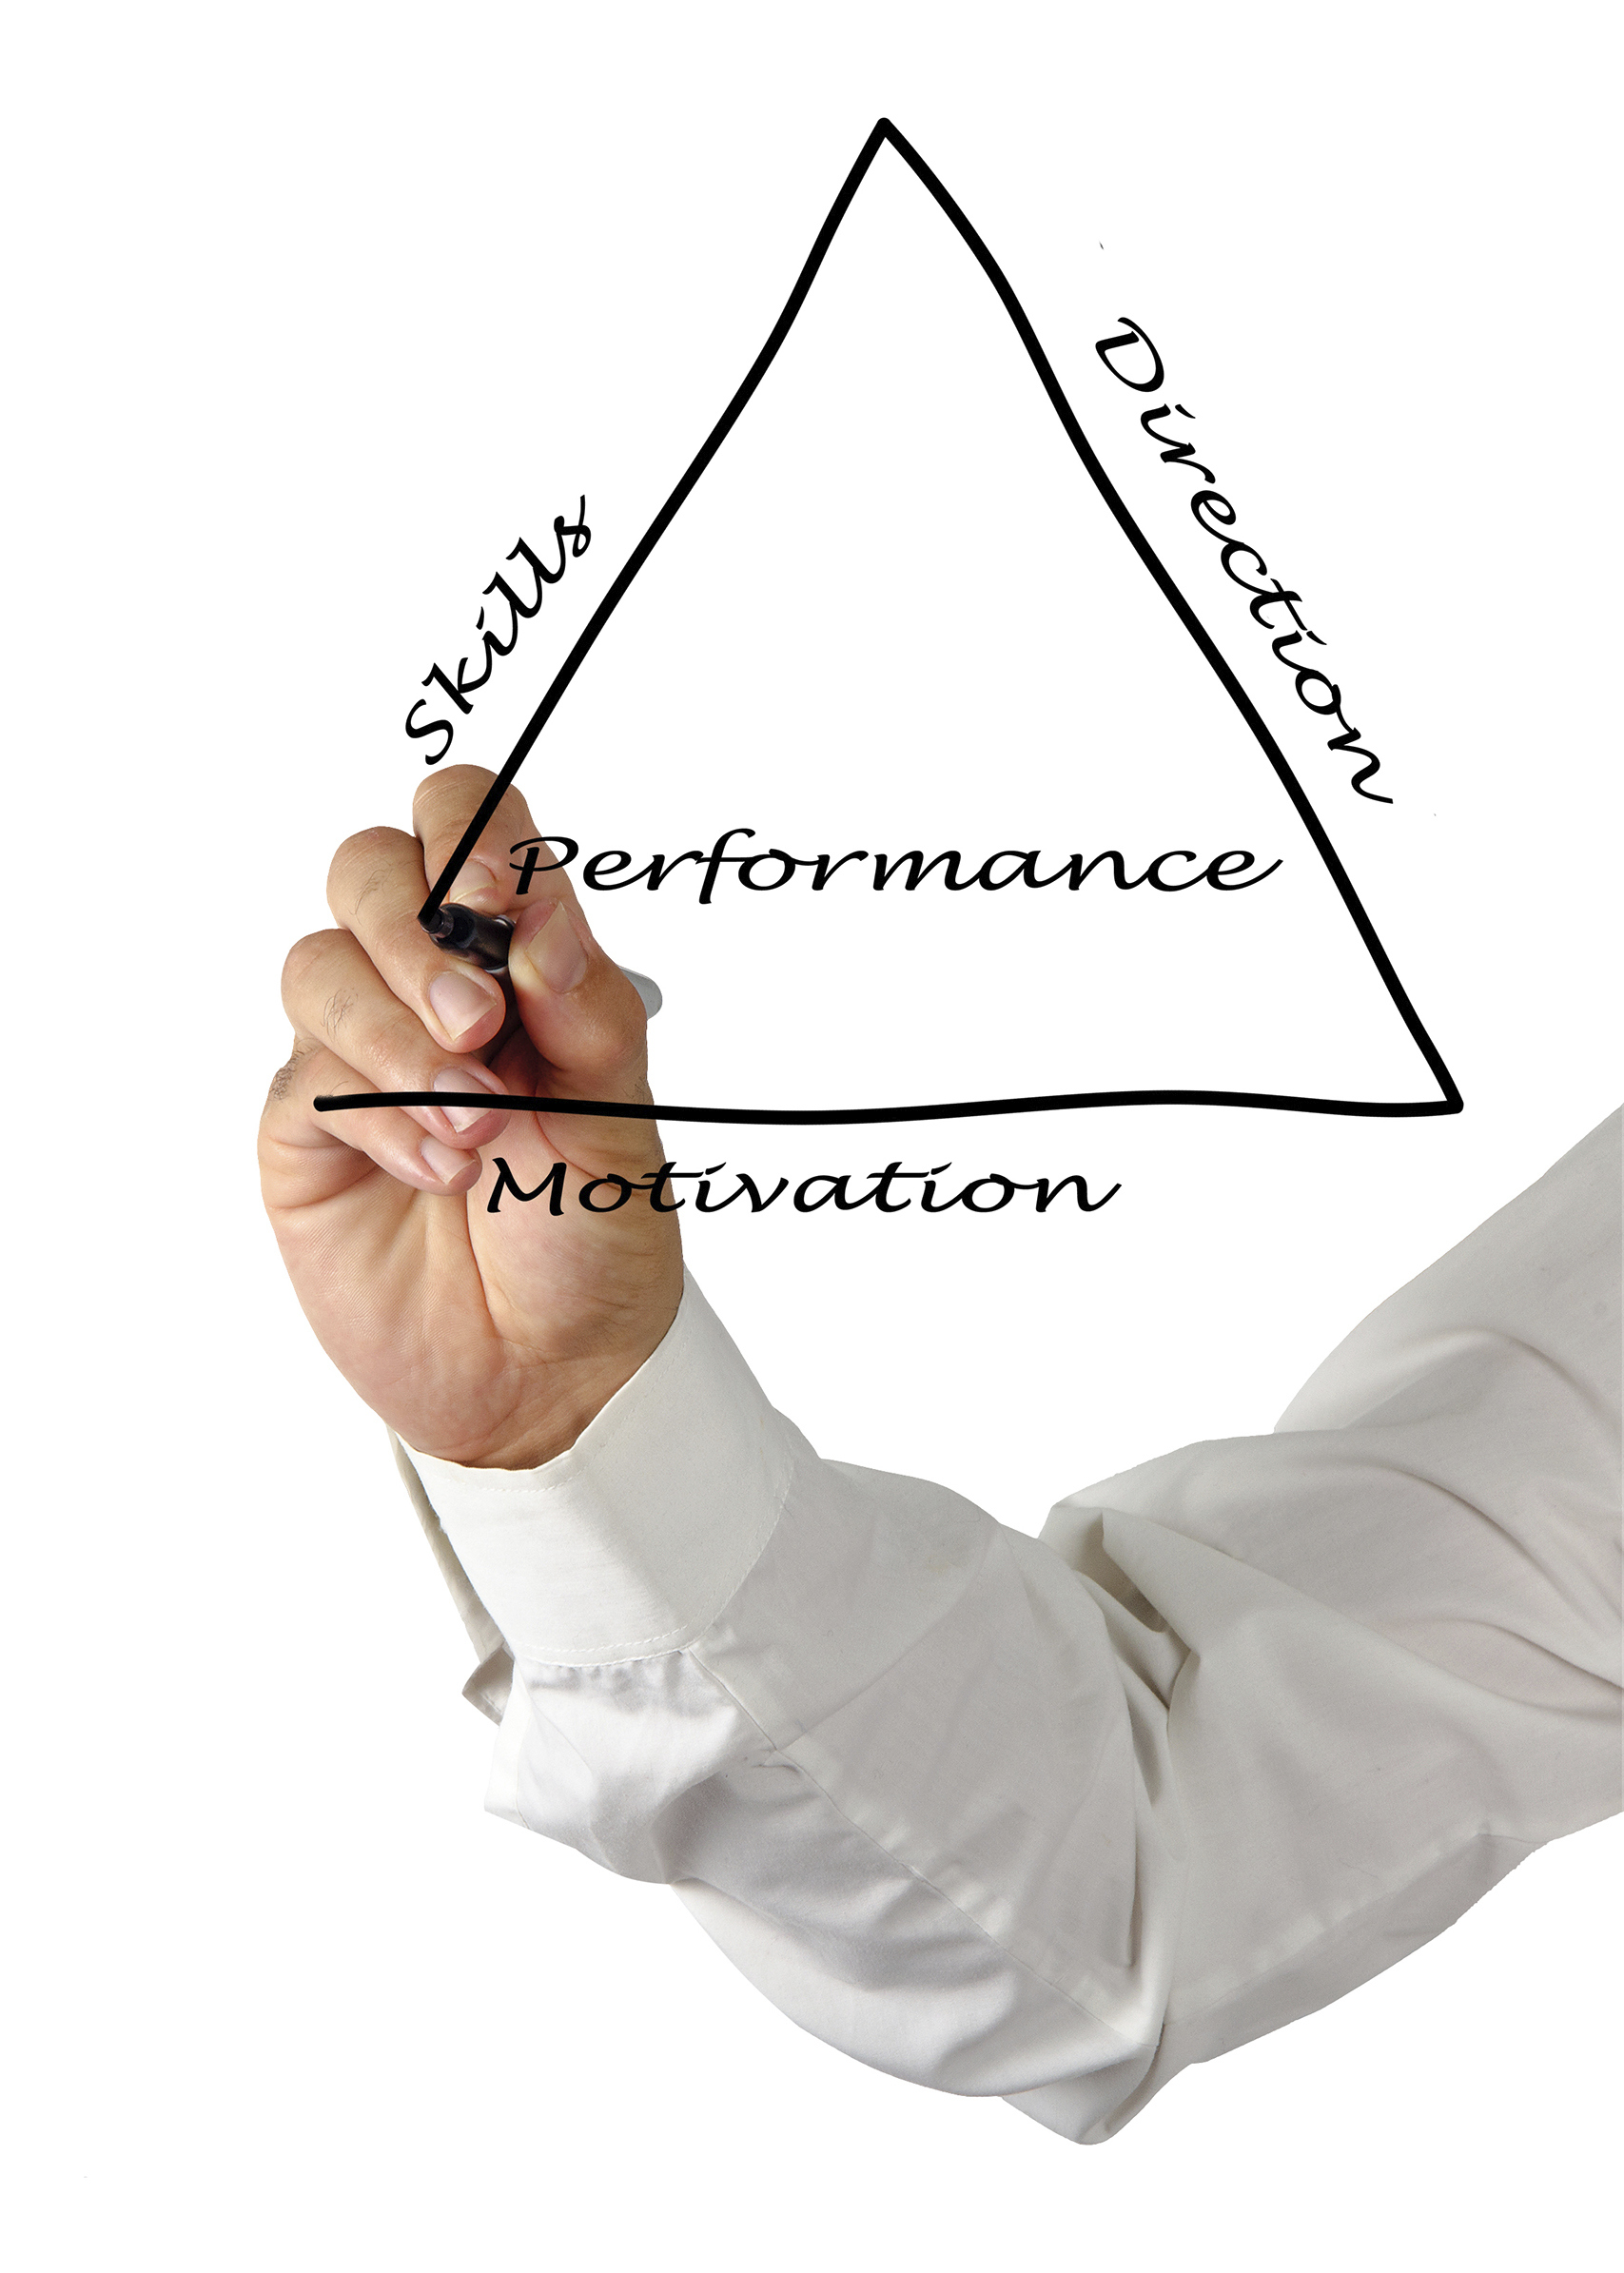 9 Ways to Motivate Employees with Performance Reviews